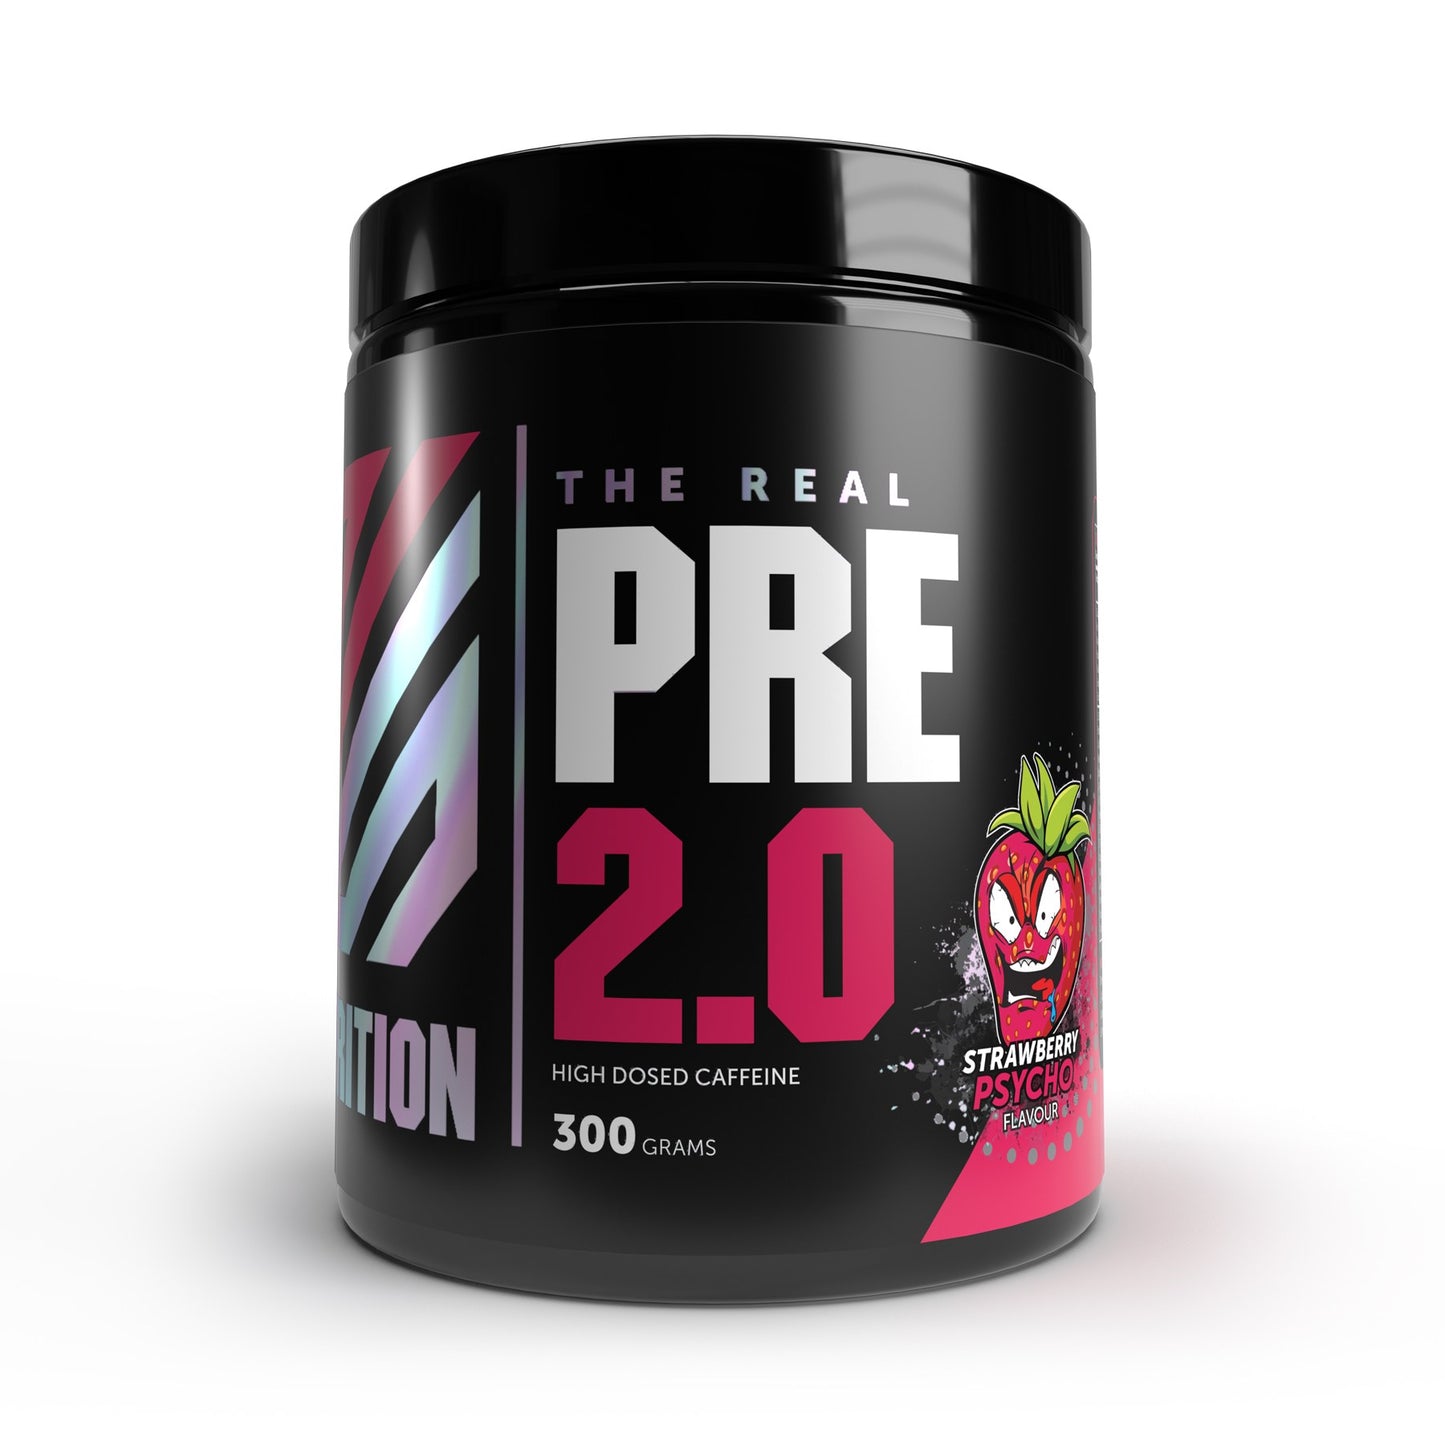 RS Nutrition The Real Pre V2 Strawberry Psycho